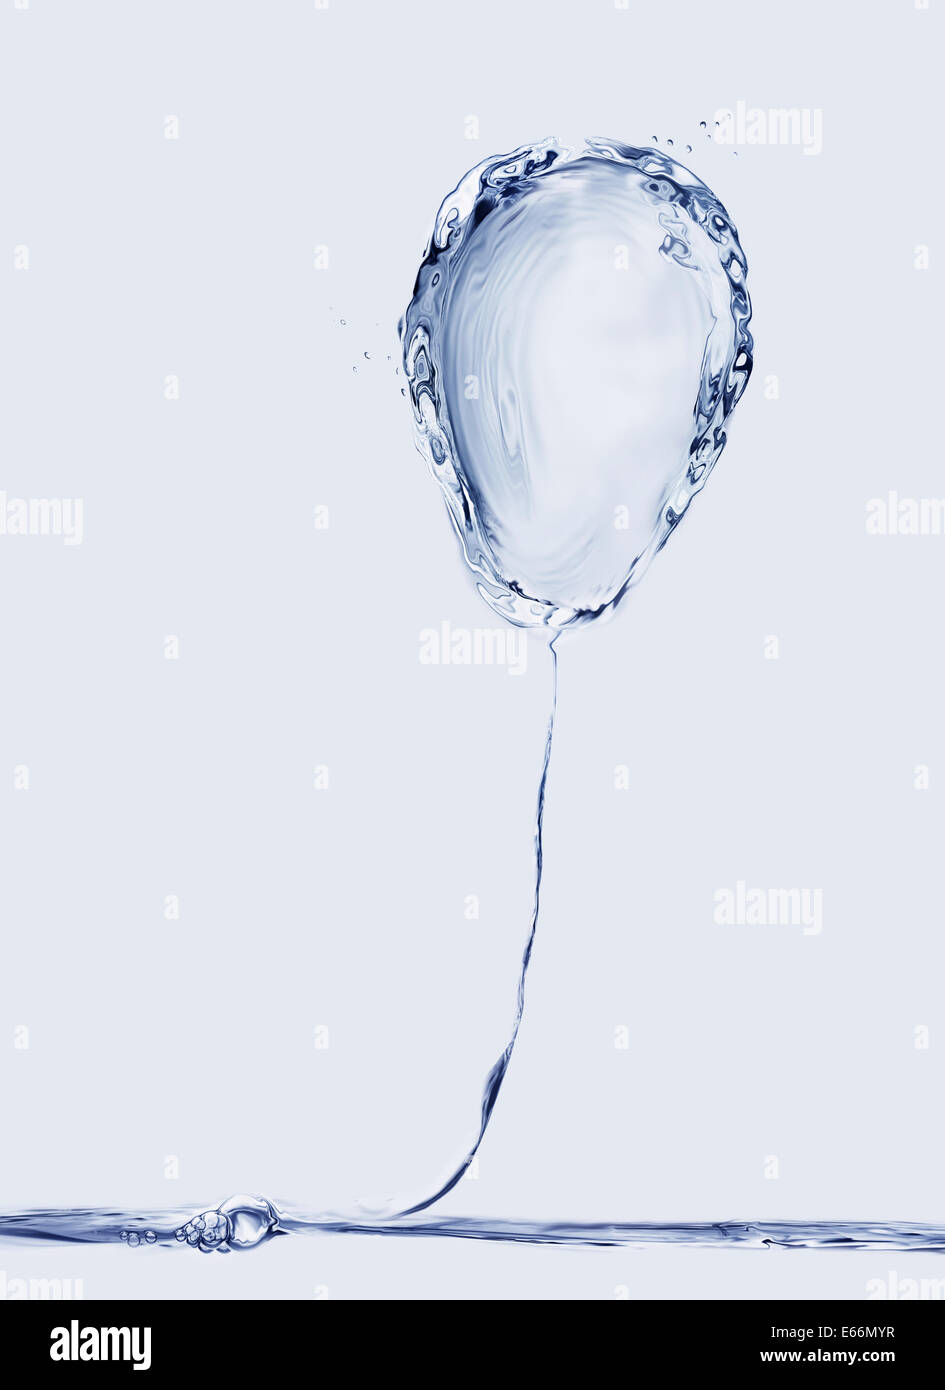 A blue balloon made of water. Stock Photo